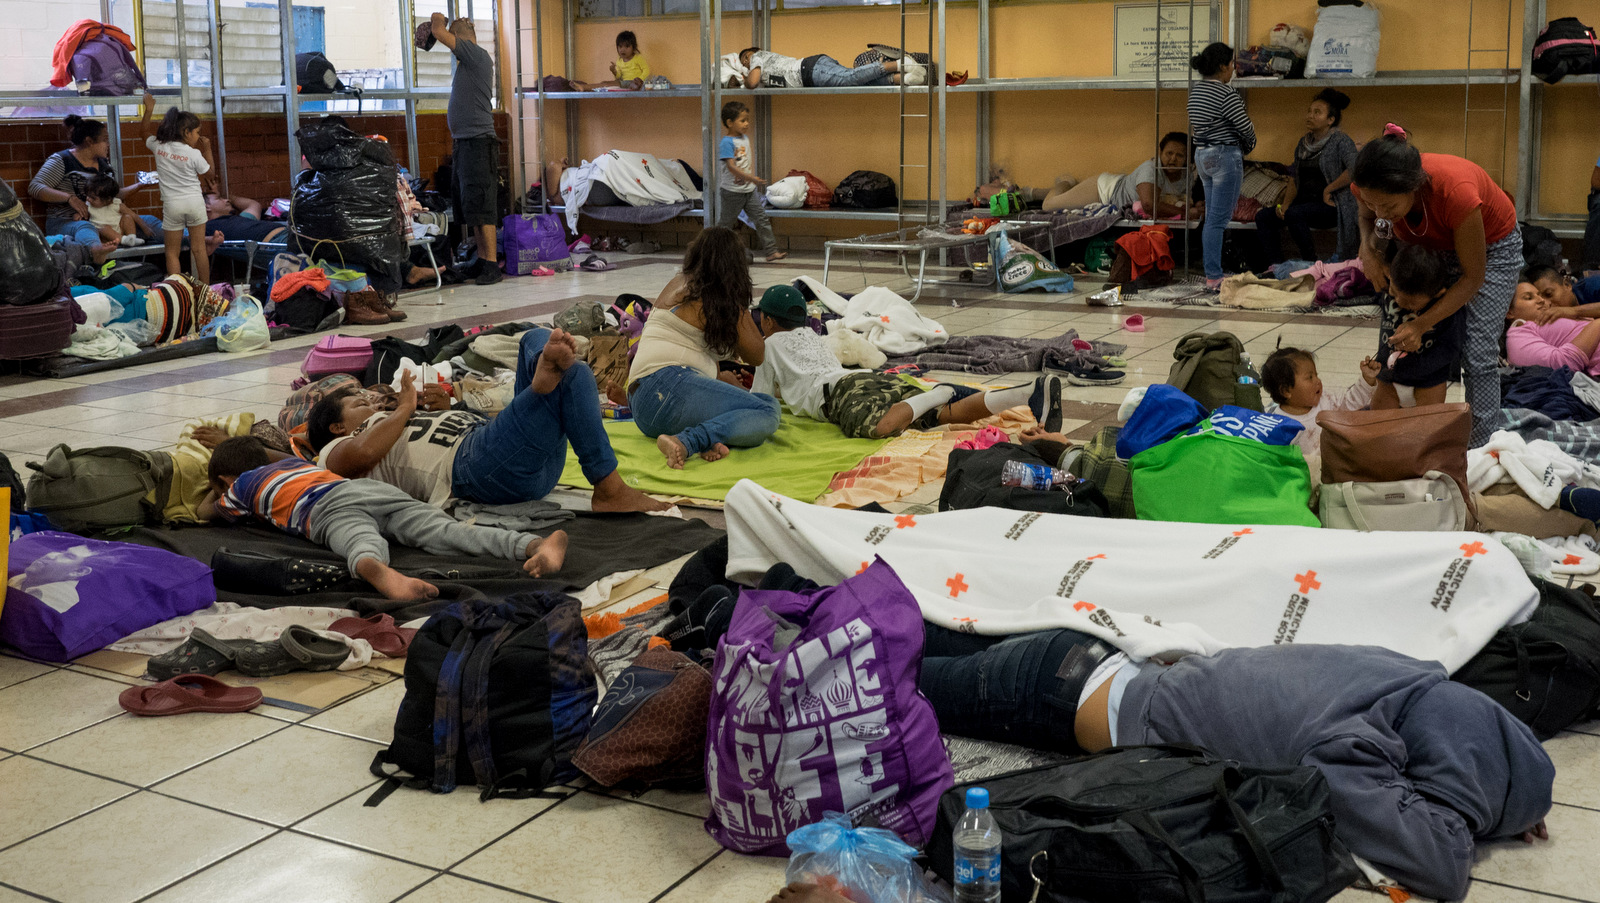 Migrants from Central America settle into the Casa del Peregrino in Mexico City, their home for the next few days before continuing on their journey north, April 10, 2018.